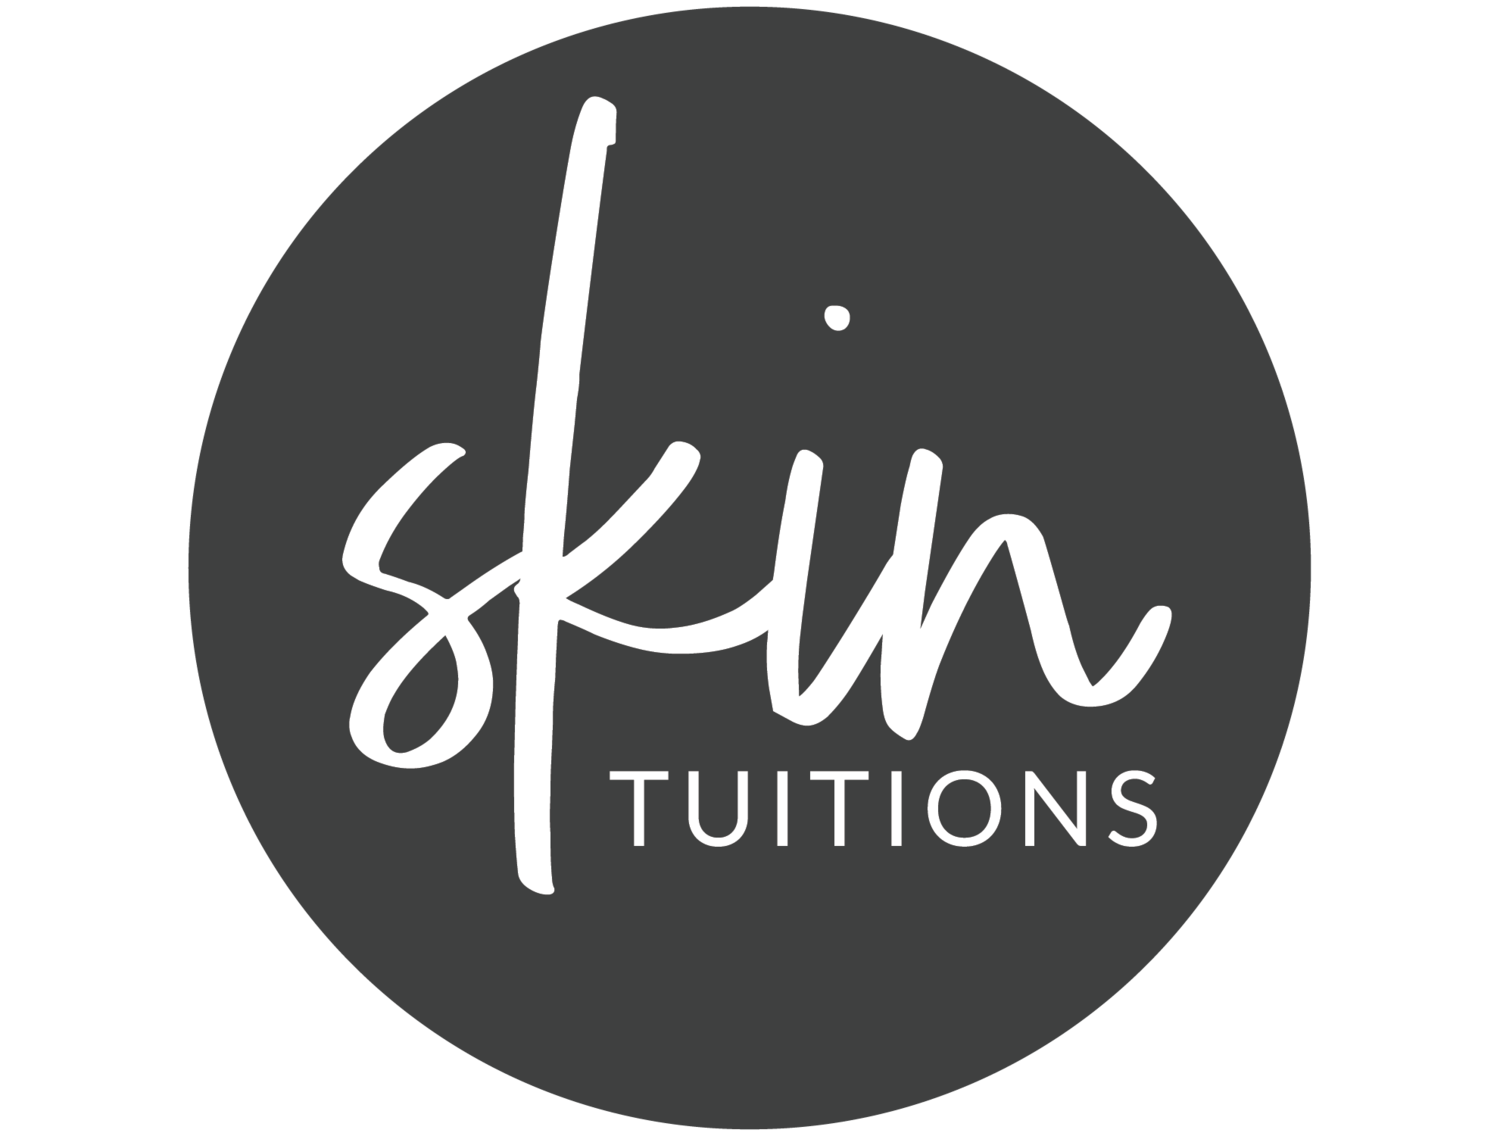 Skintuitions